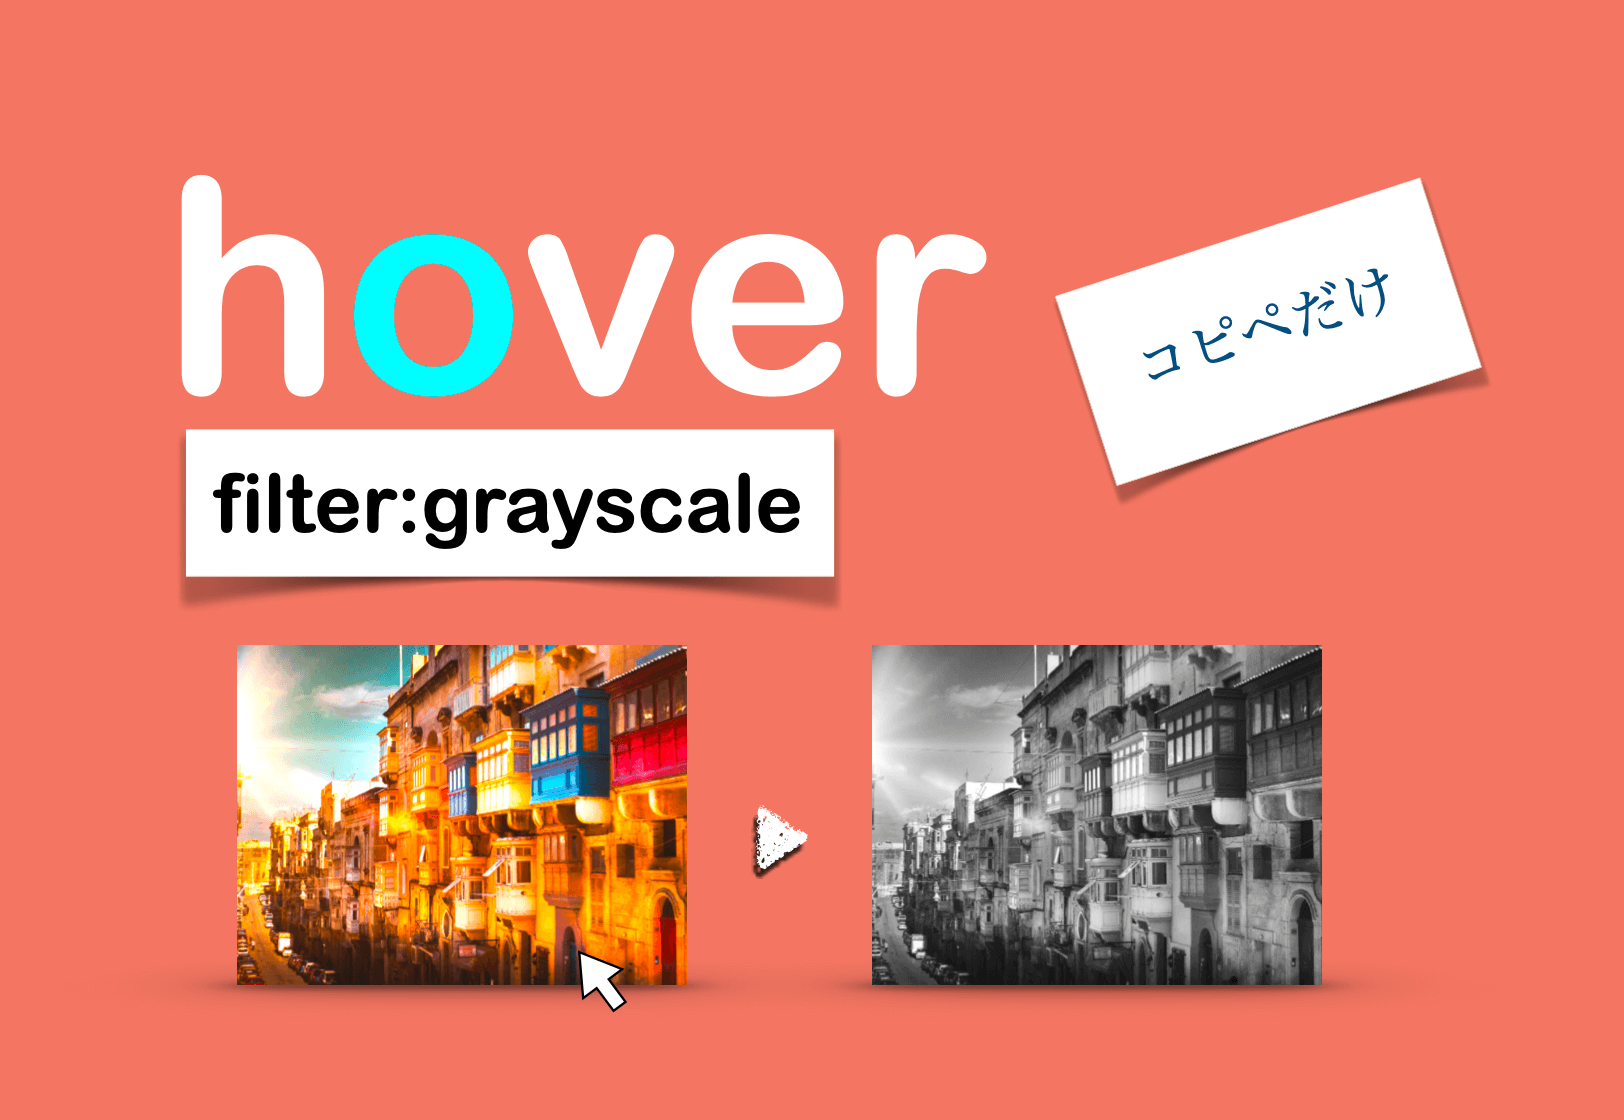 hover-animation-filter-grayscale.png